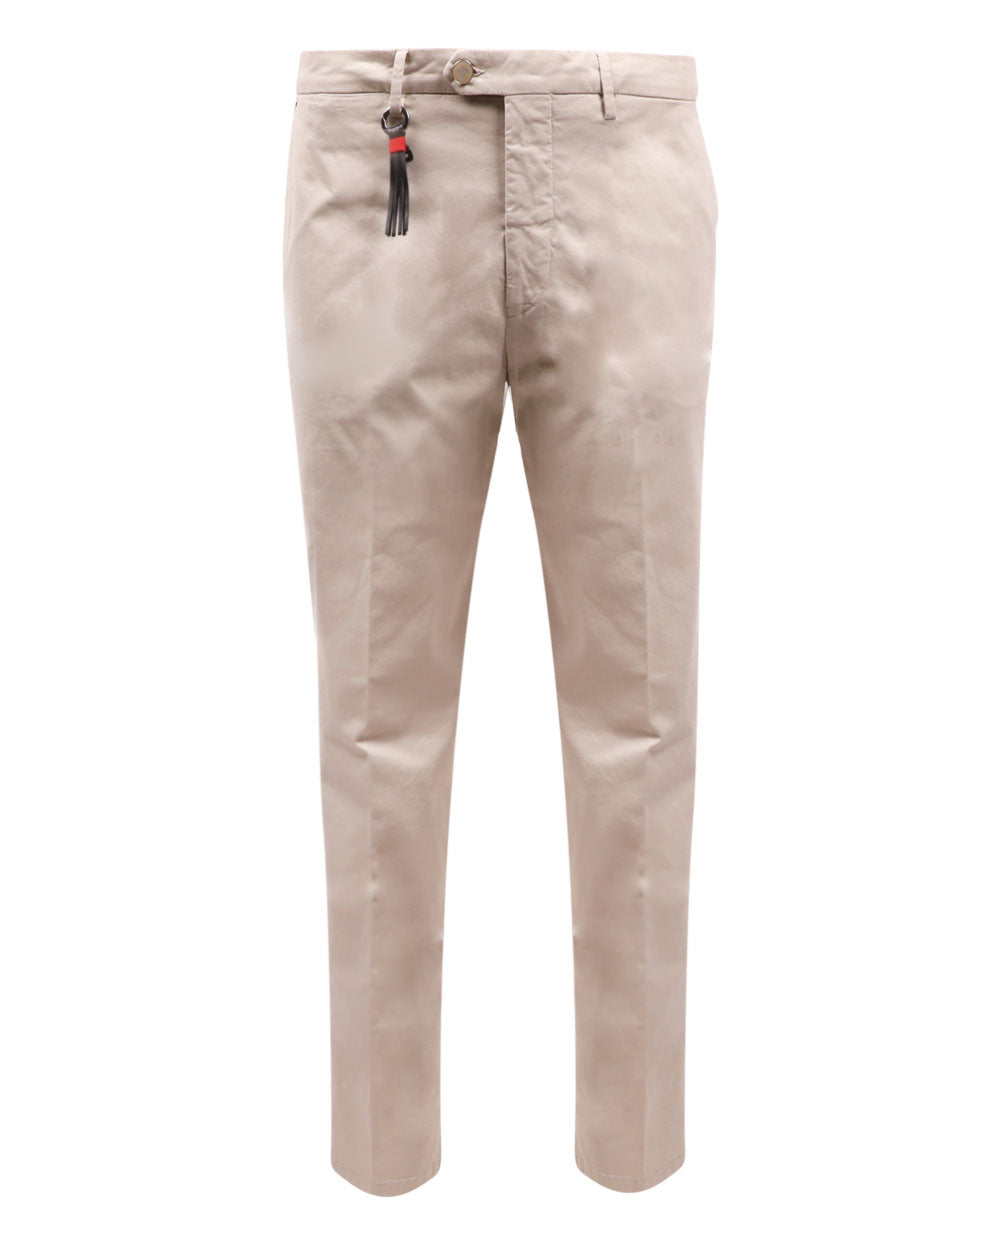 5 Pocket Chino Pant in Beige